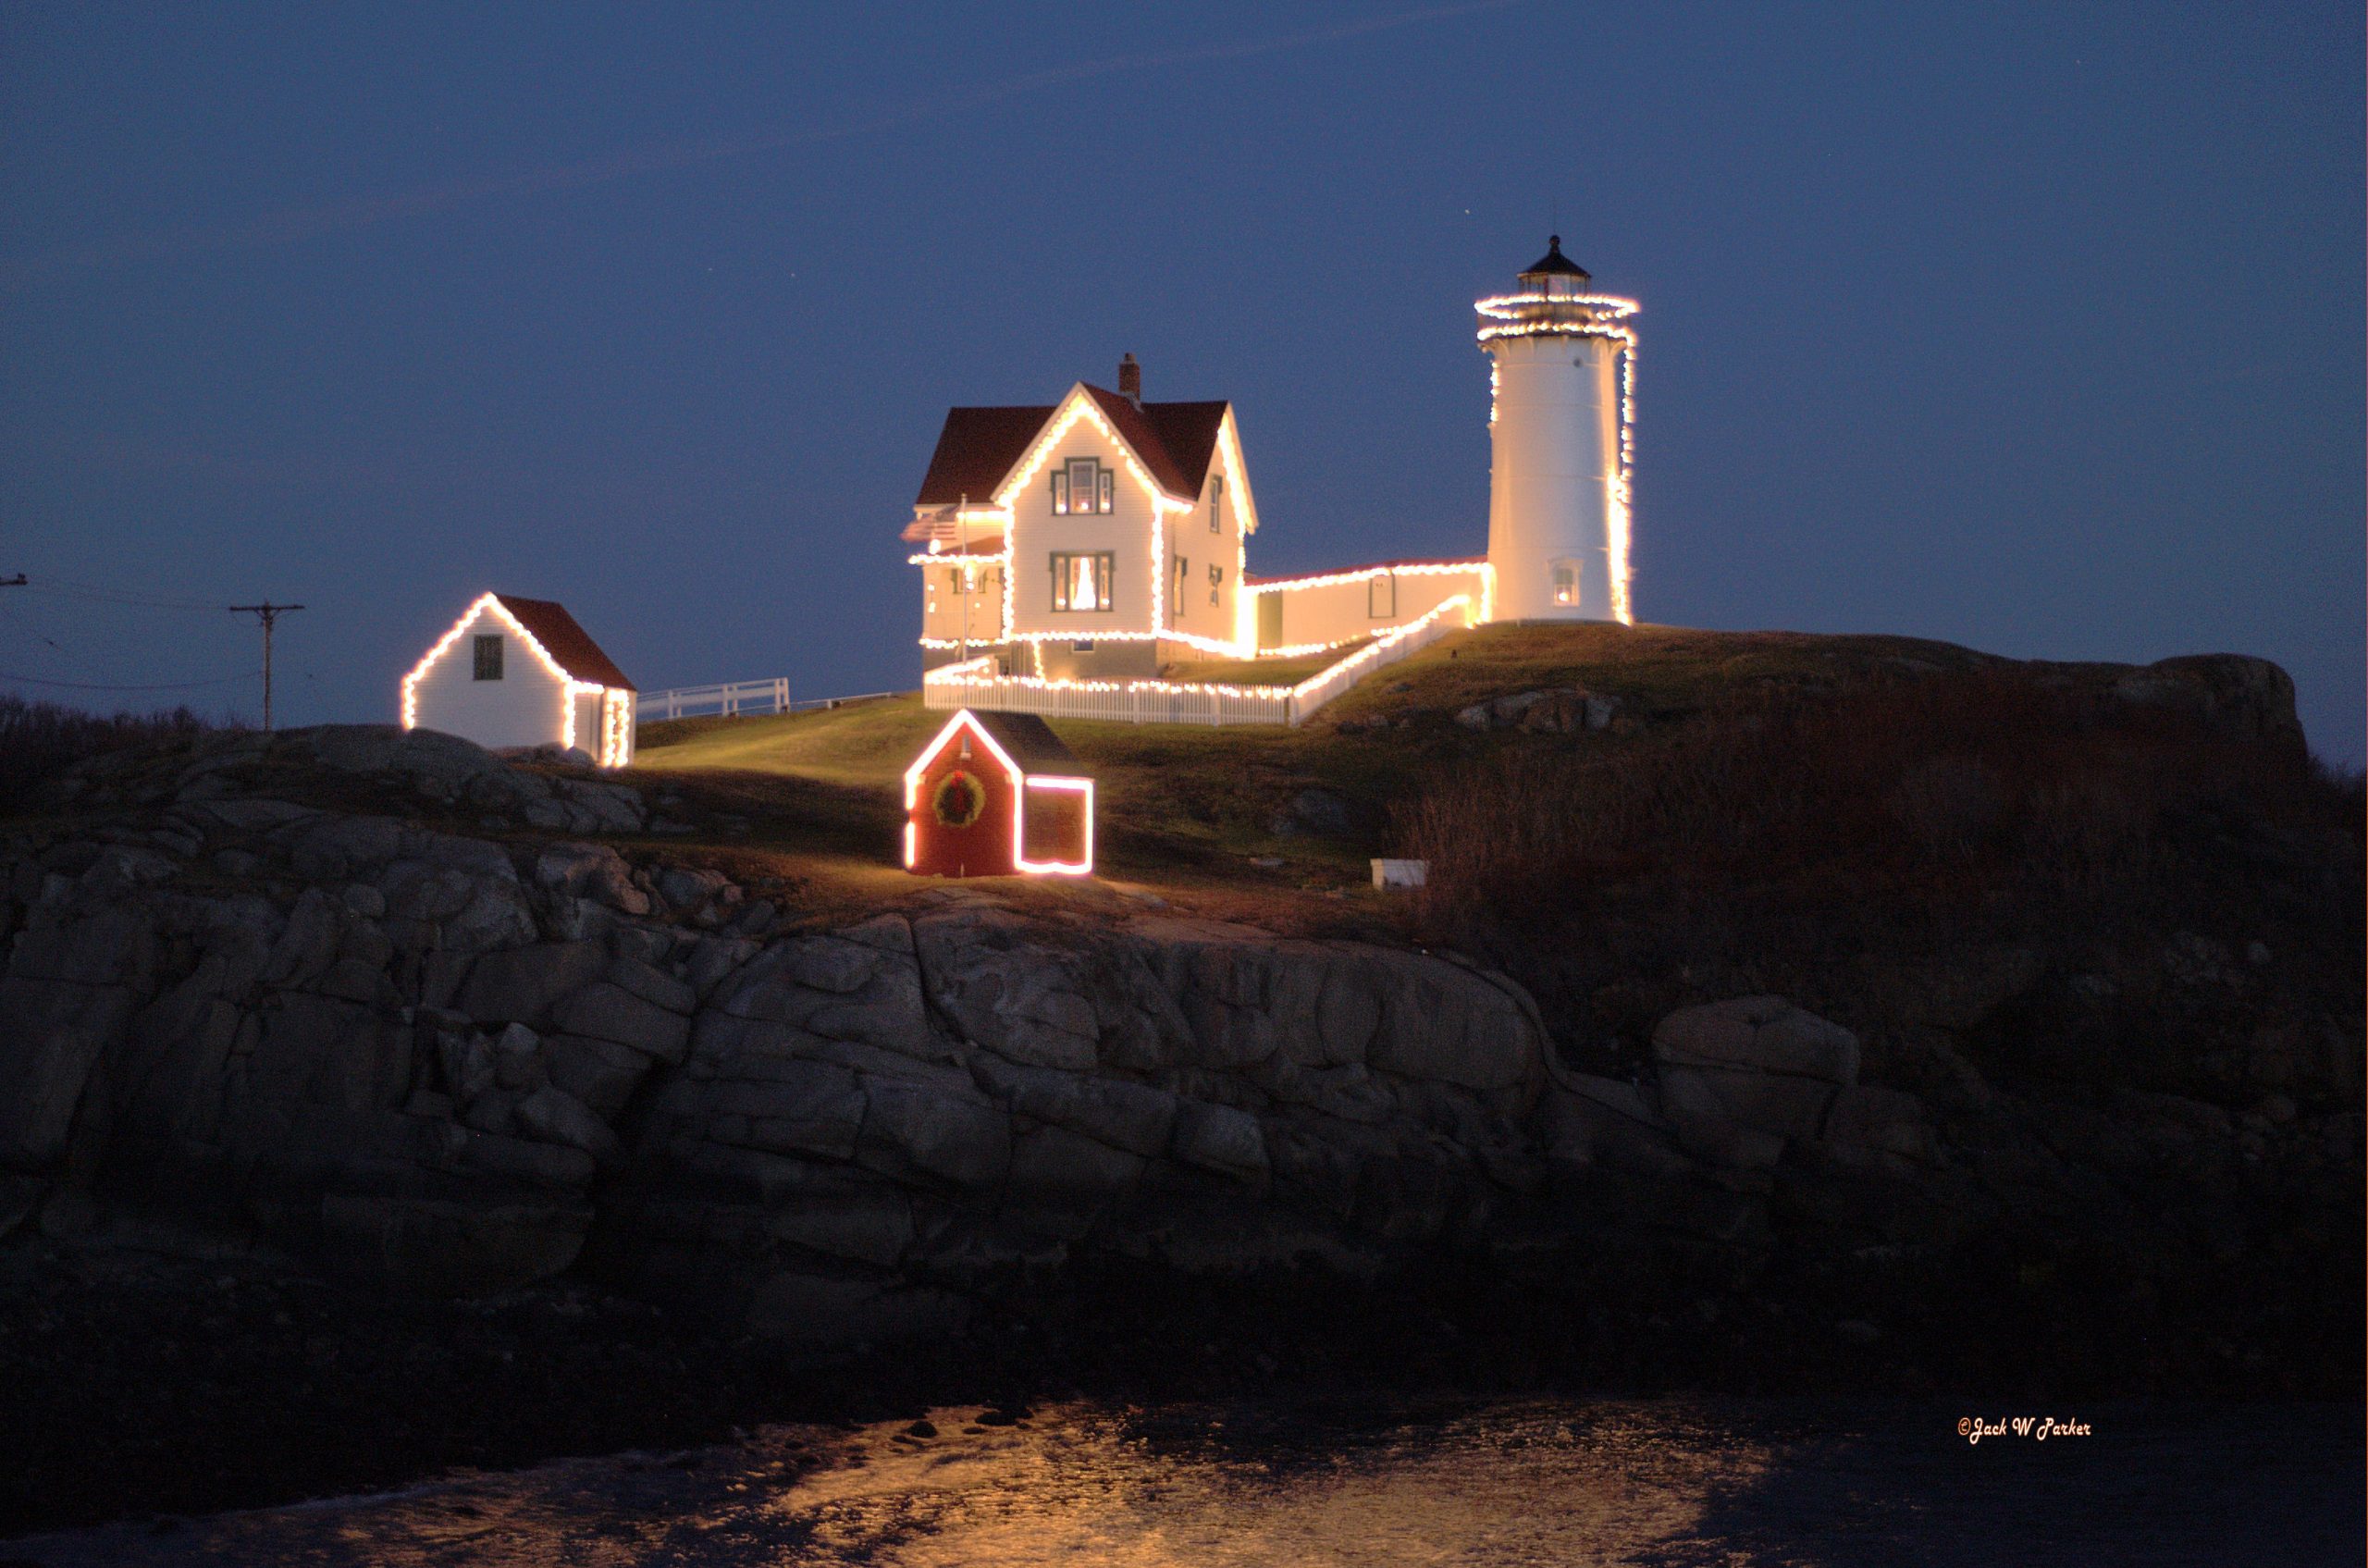 Holidays at the Nubble (user submitted)